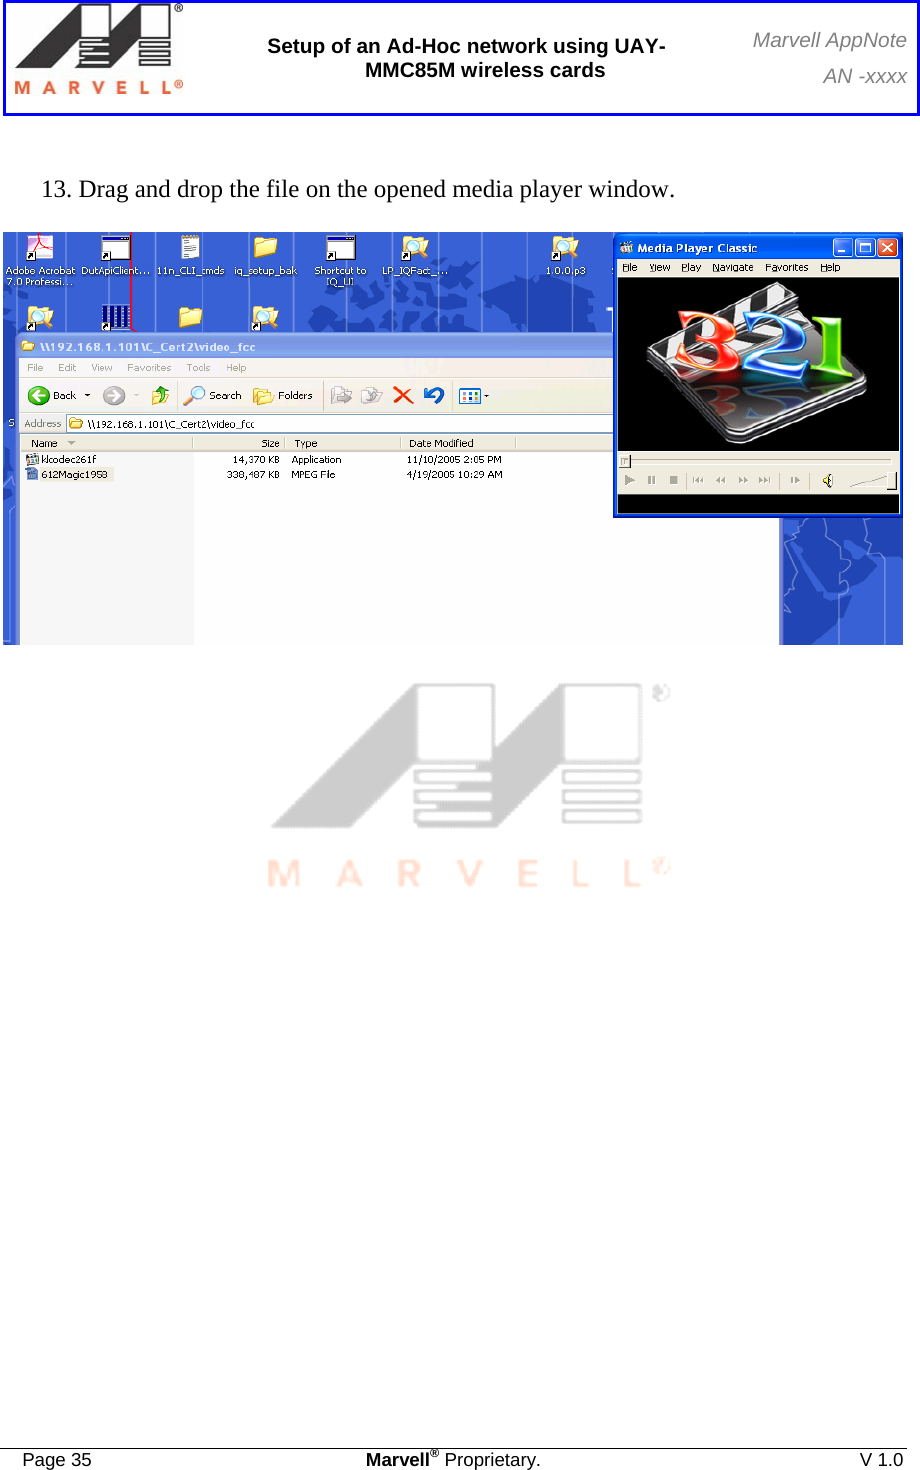  Setup of an Ad-Hoc network using UAY-MMC85M wireless cards Marvell AppNoteAN -xxxx  Page 35  Marvell® Proprietary.  V 1.0  13. Drag and drop the file on the opened media player window.                               